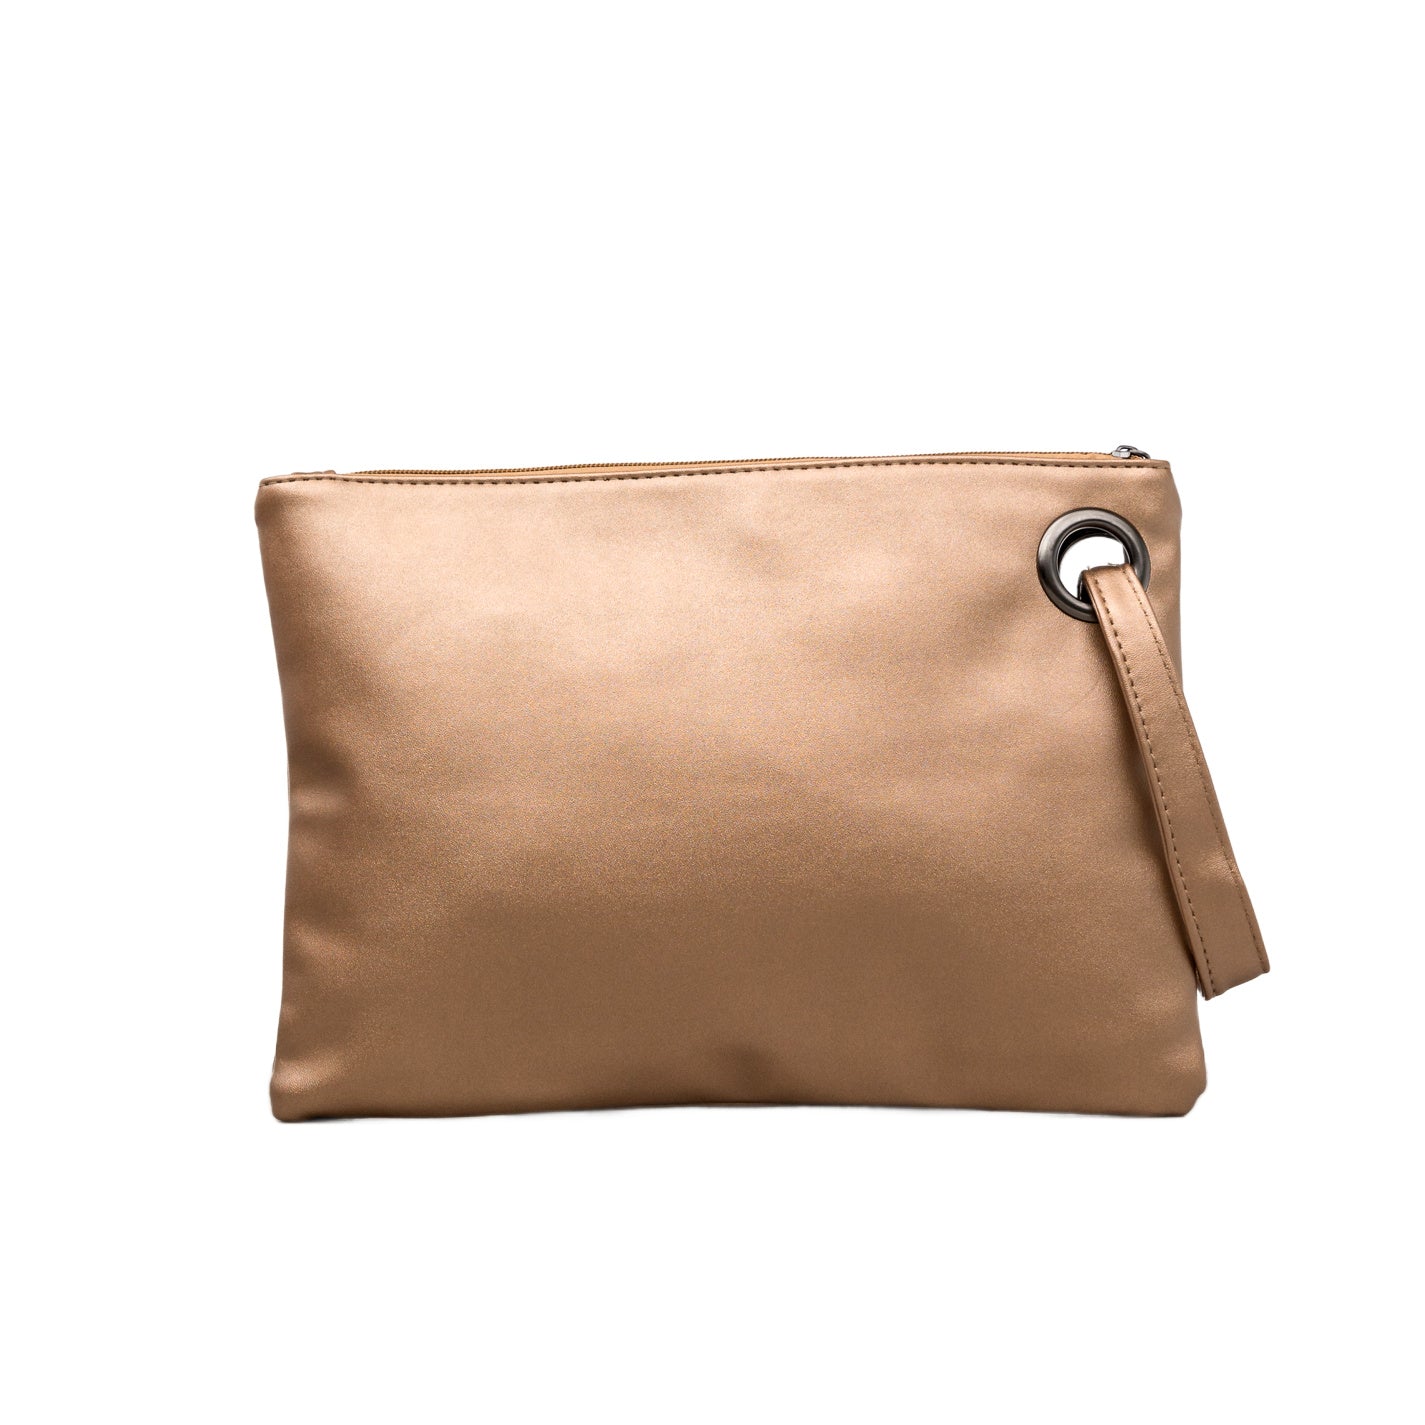 Over-sized Everyday Clutch